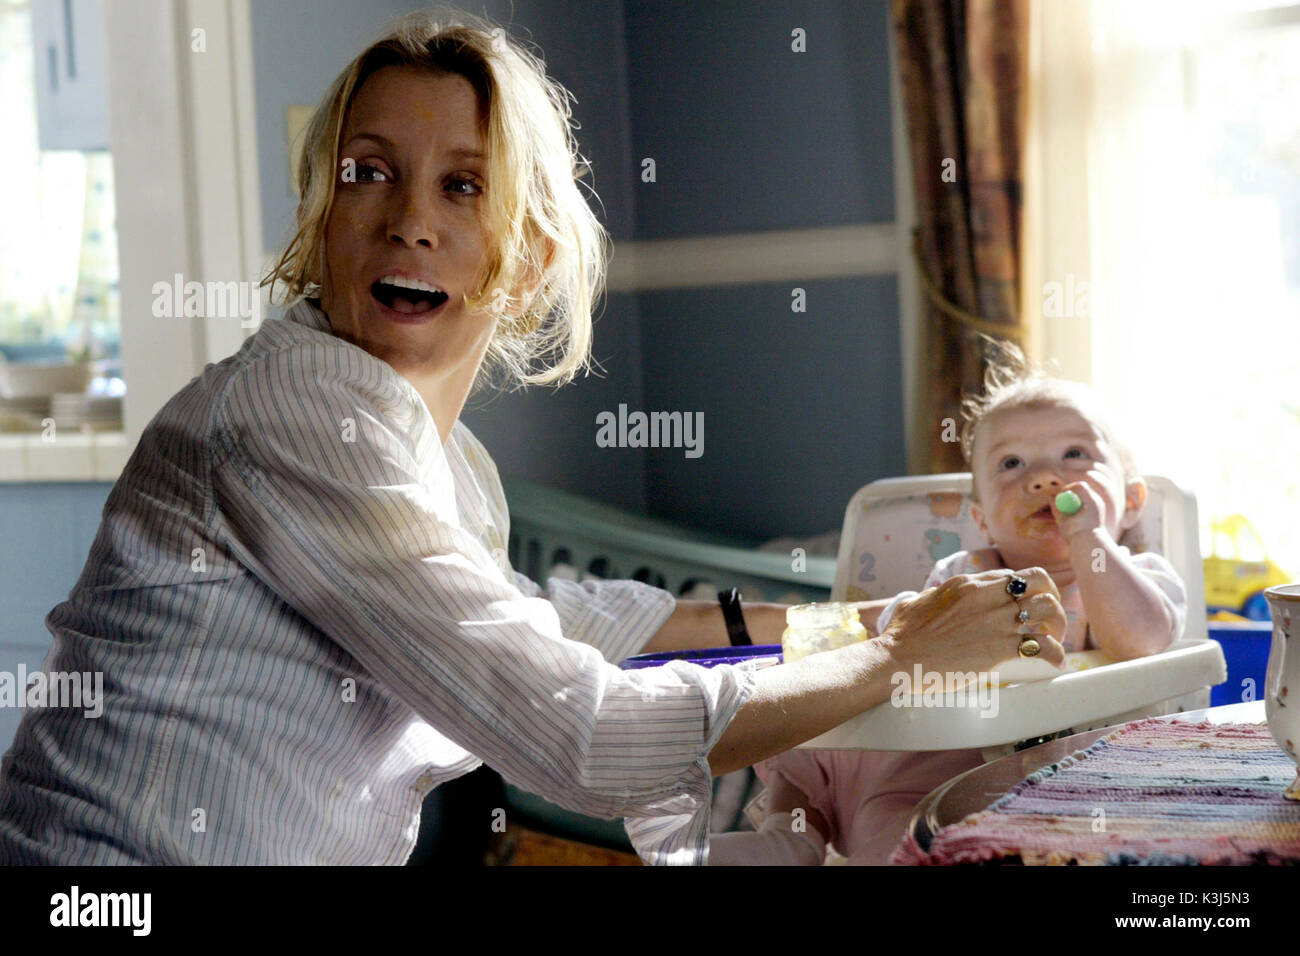 DESPERATE HOUSEWIVES FELICITY HUFFMAN als Lynette Scavo Stockfoto